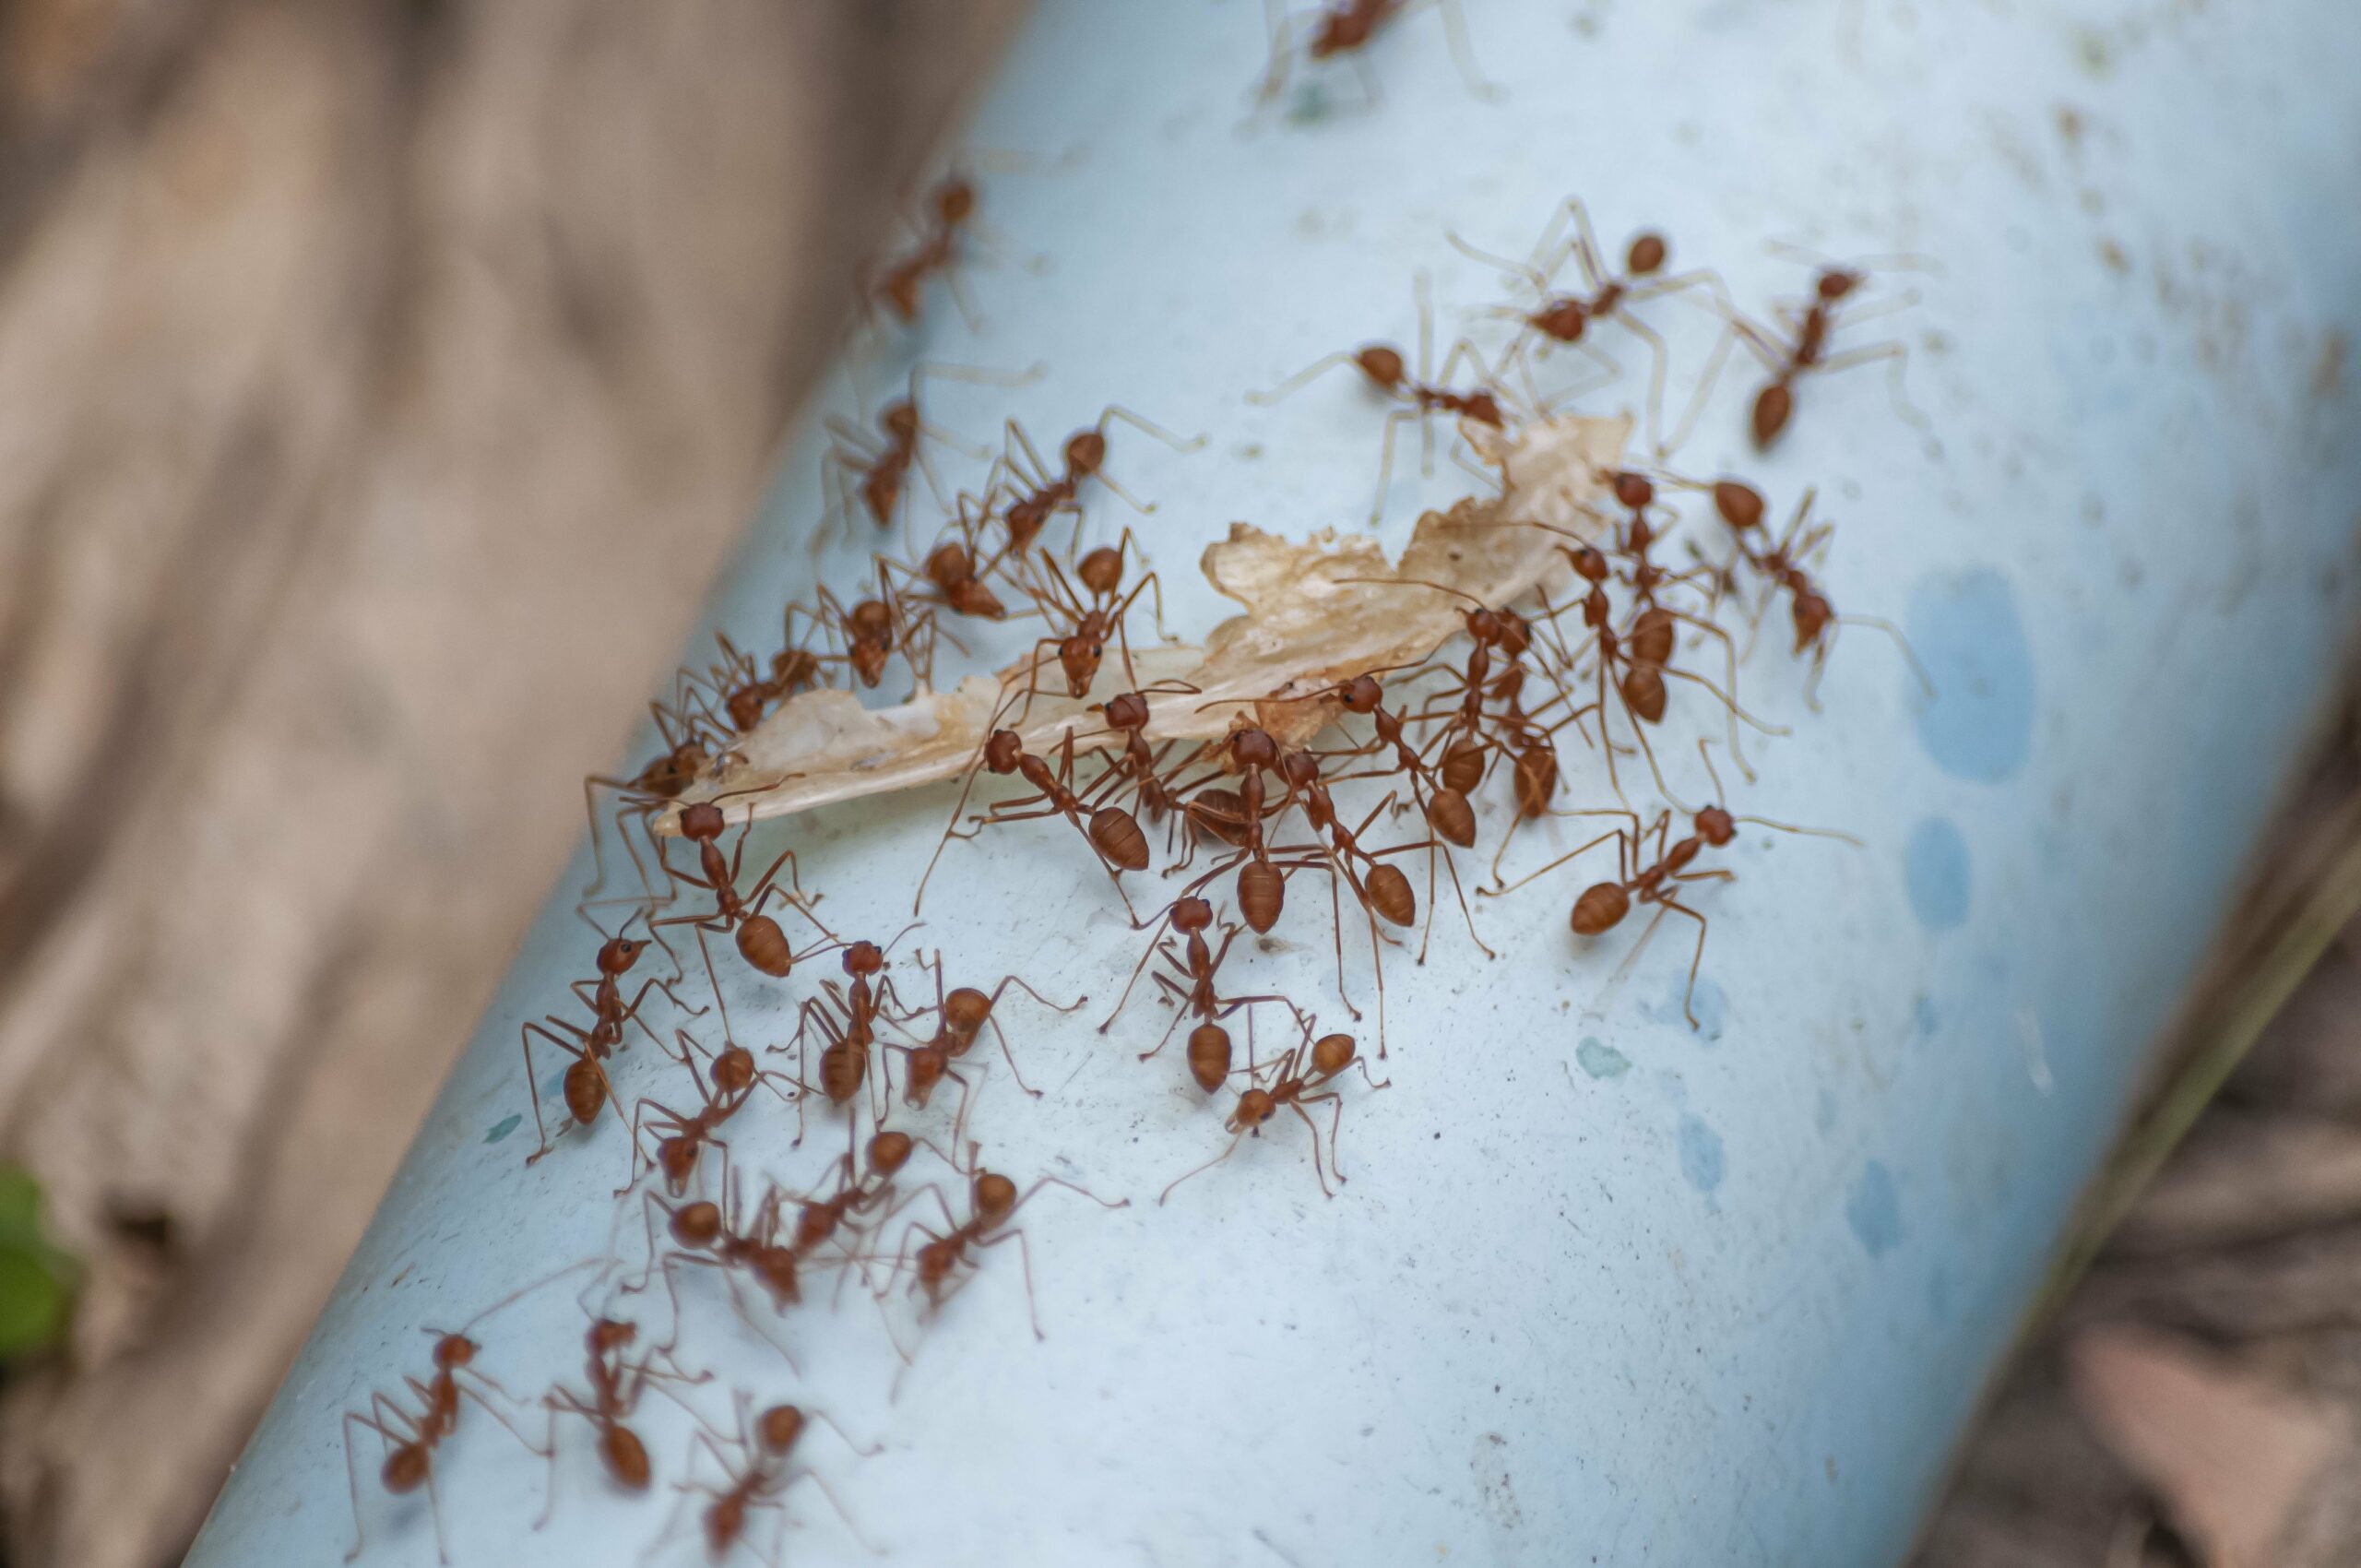 top-view-shot-of-red-ants-carrying-a-leaf-on-the-p-min